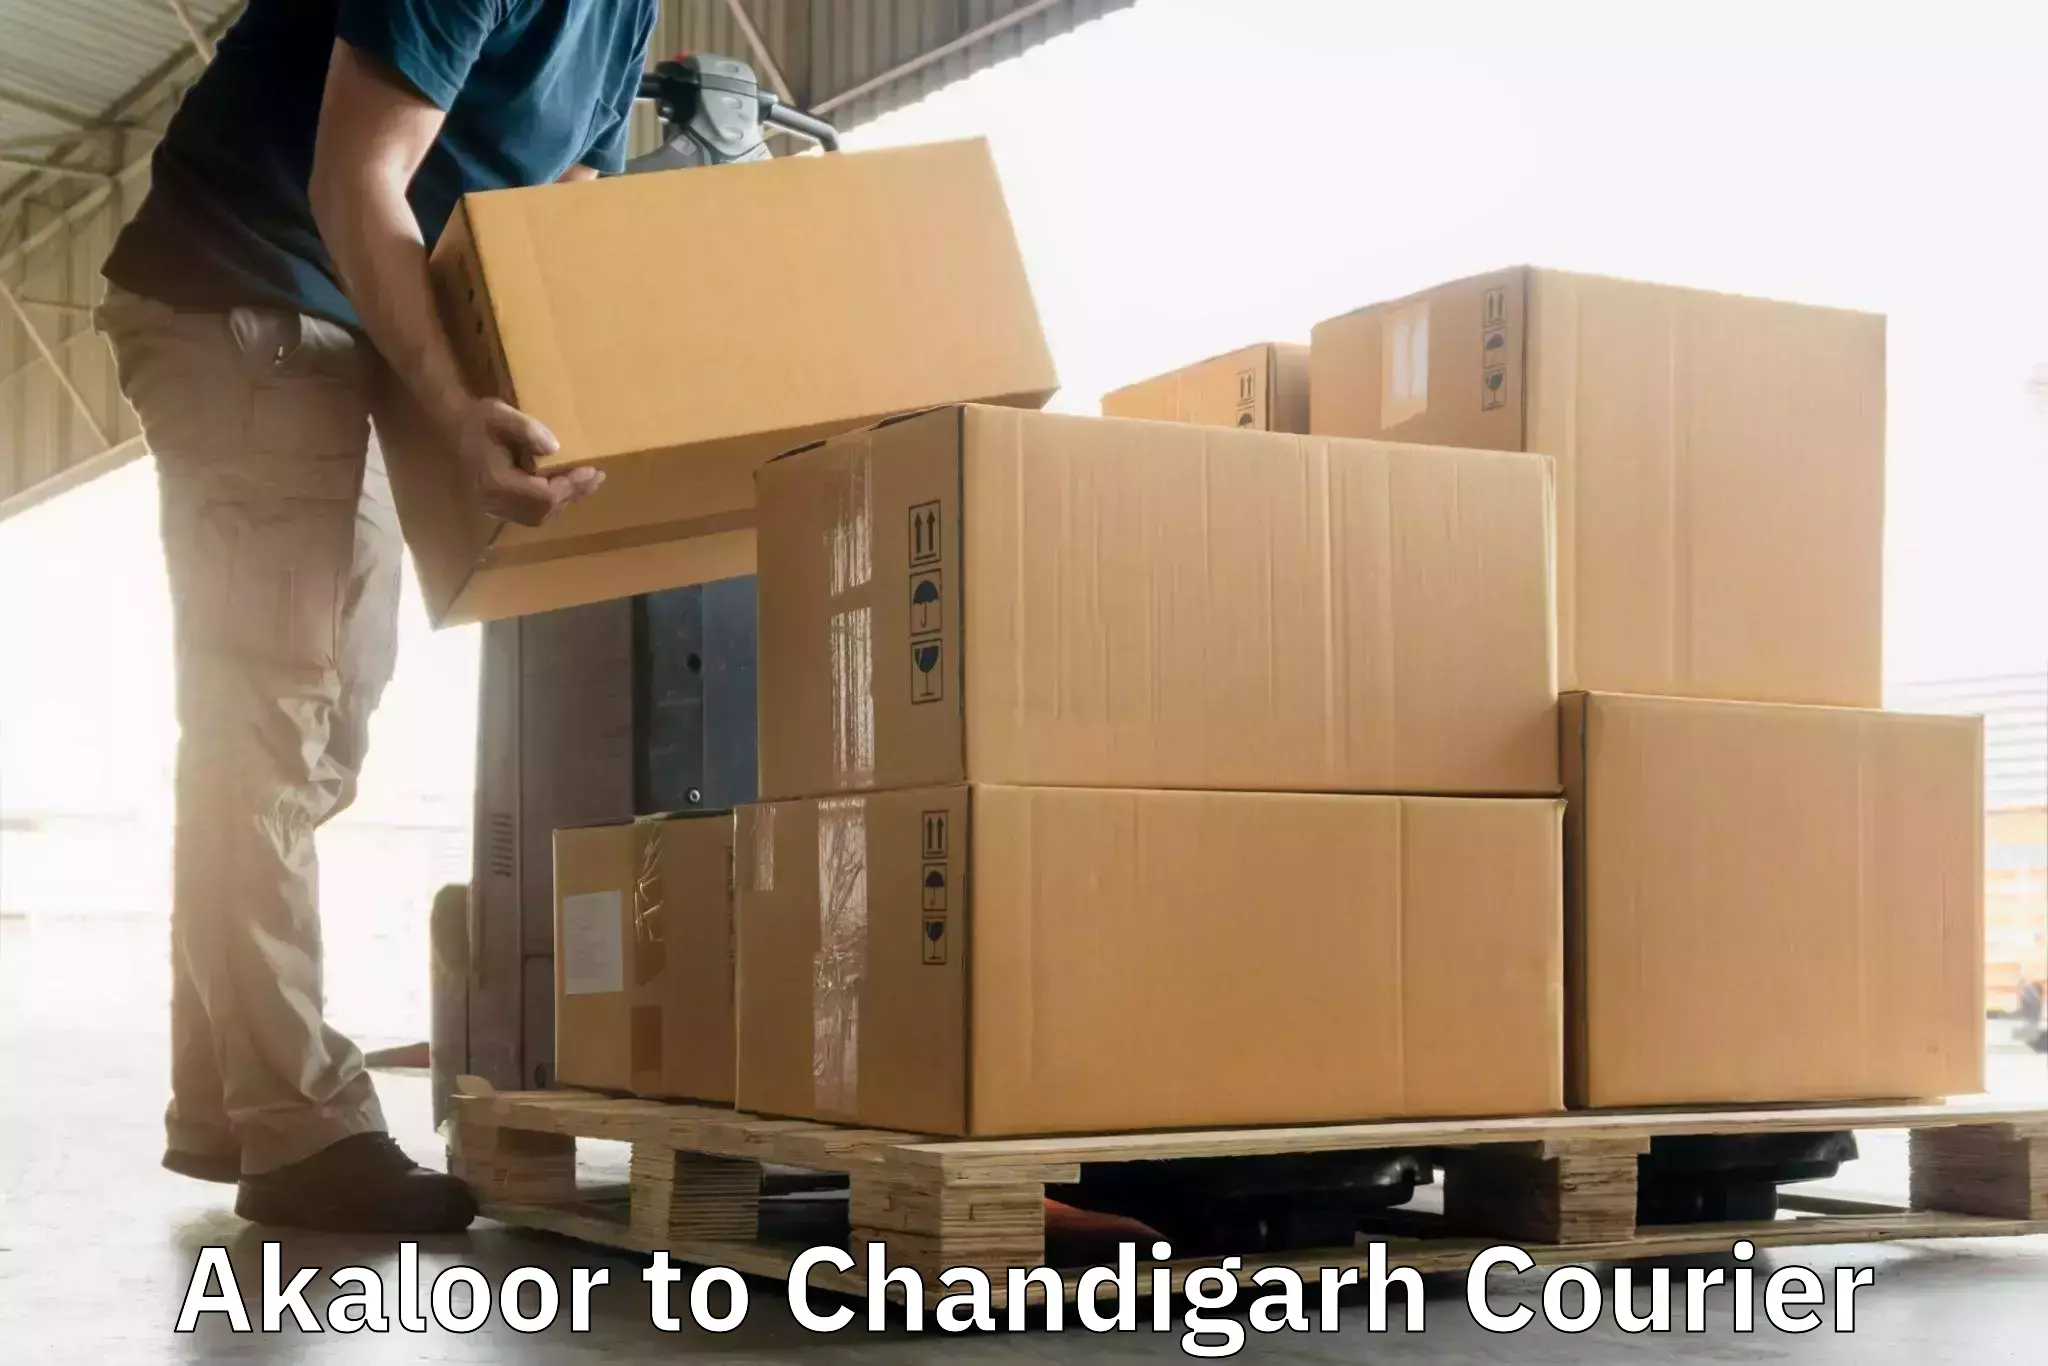 Sustainable courier practices Akaloor to Chandigarh